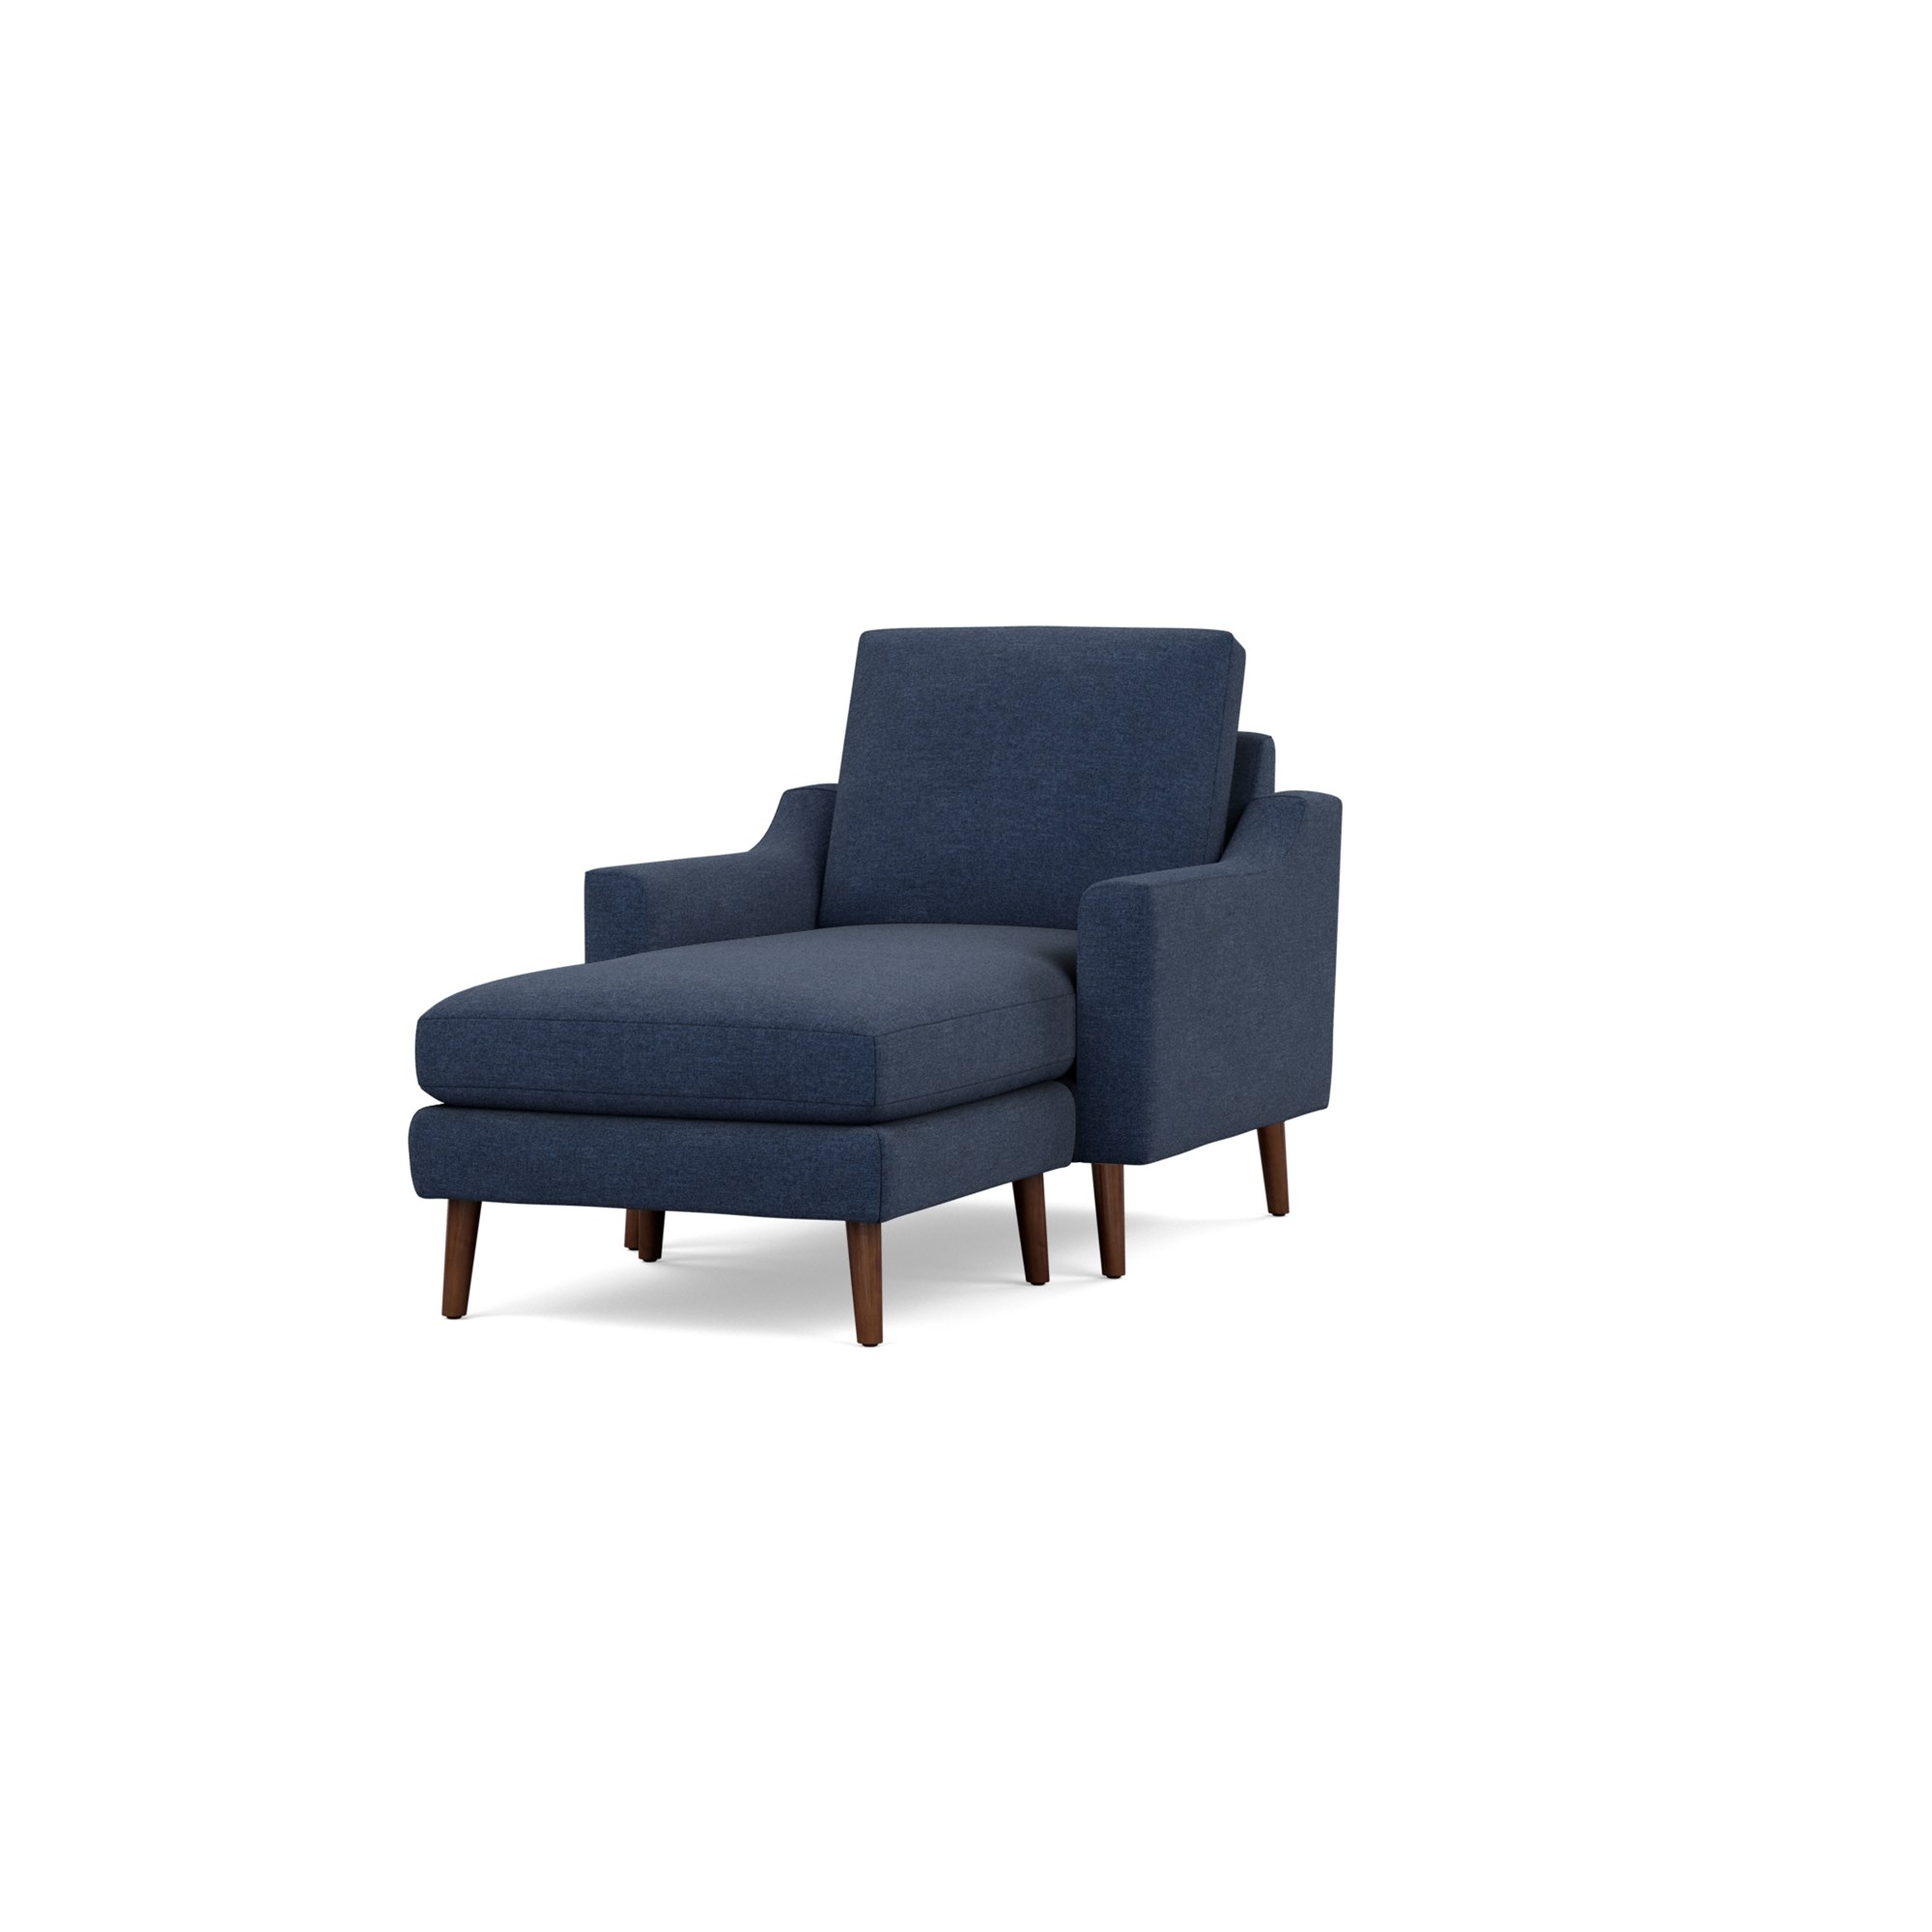 Nomad Armchair with Chaise in Navy Blue, Leg Finish: WalnutLegs - Image 0